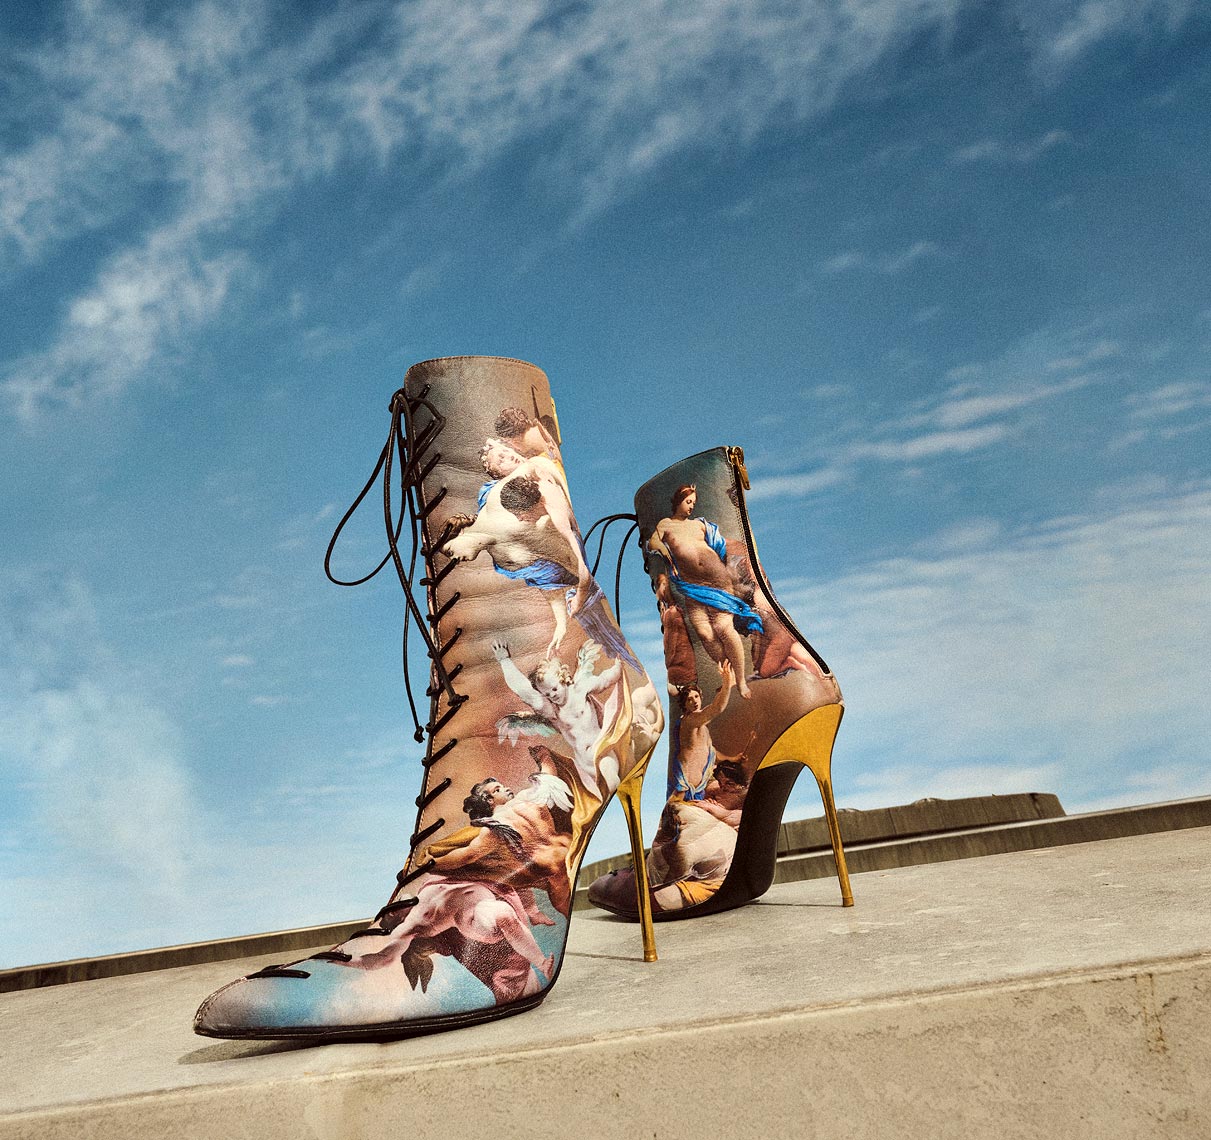 Downtown rooftop photographs of luxury shoes and handbags by pho